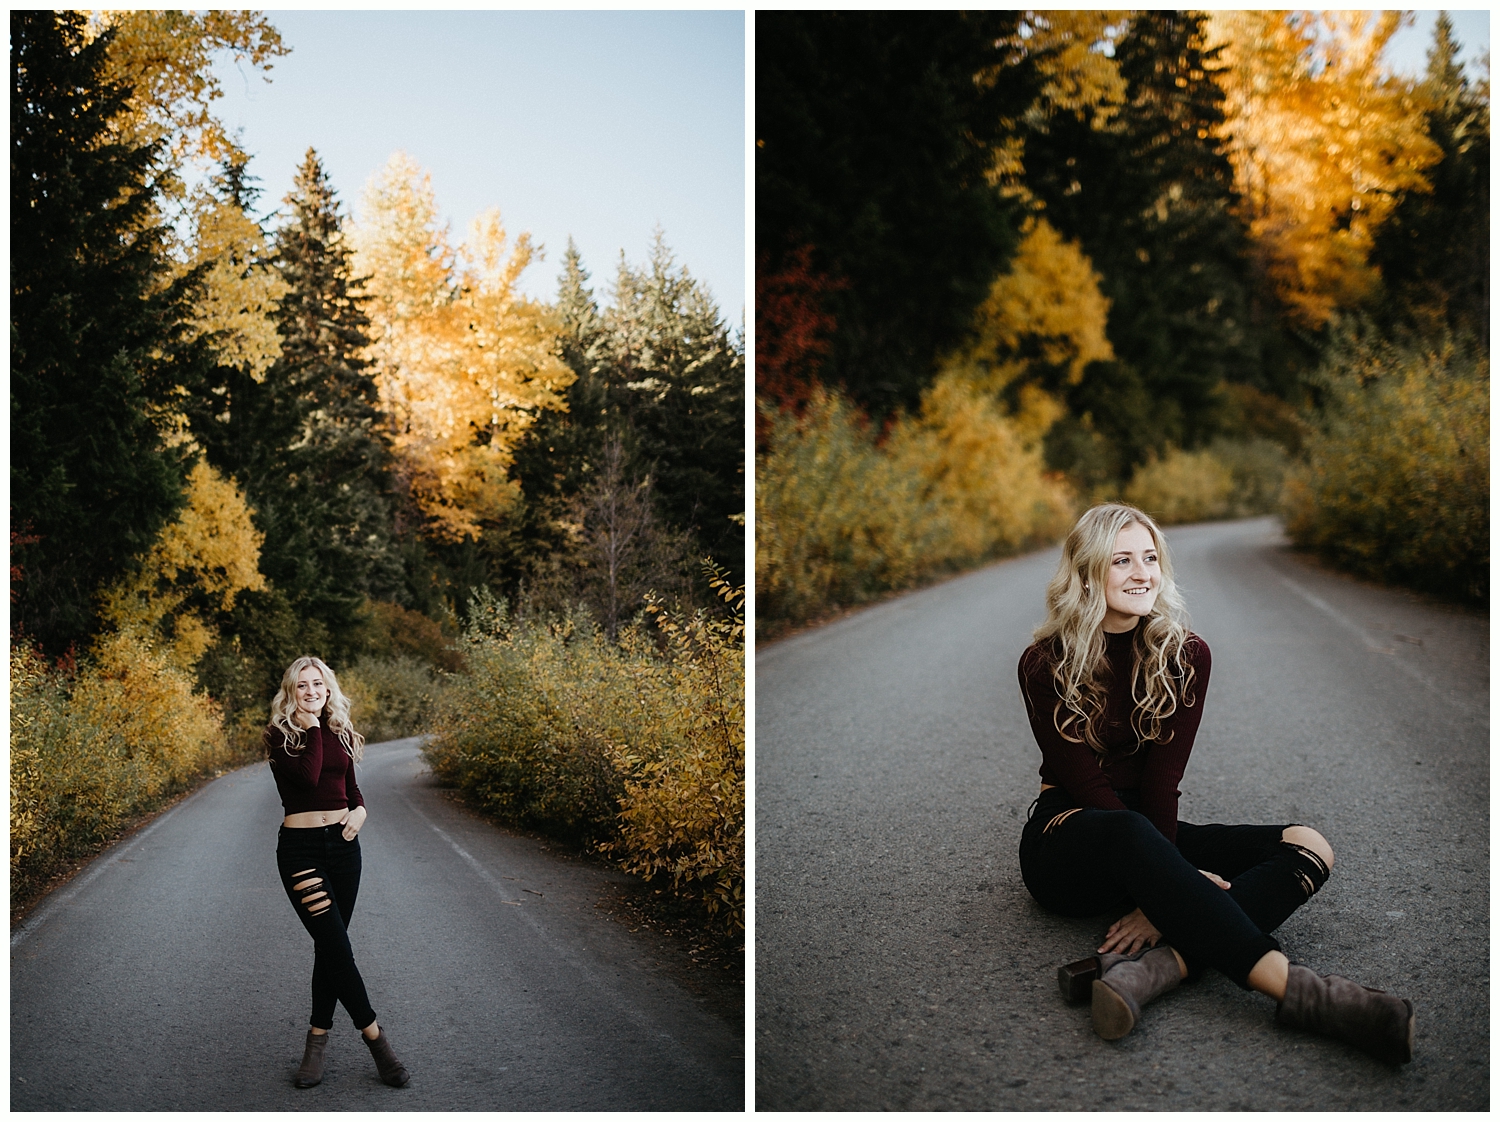  Girl standing in empty road with fall trees in the background. 